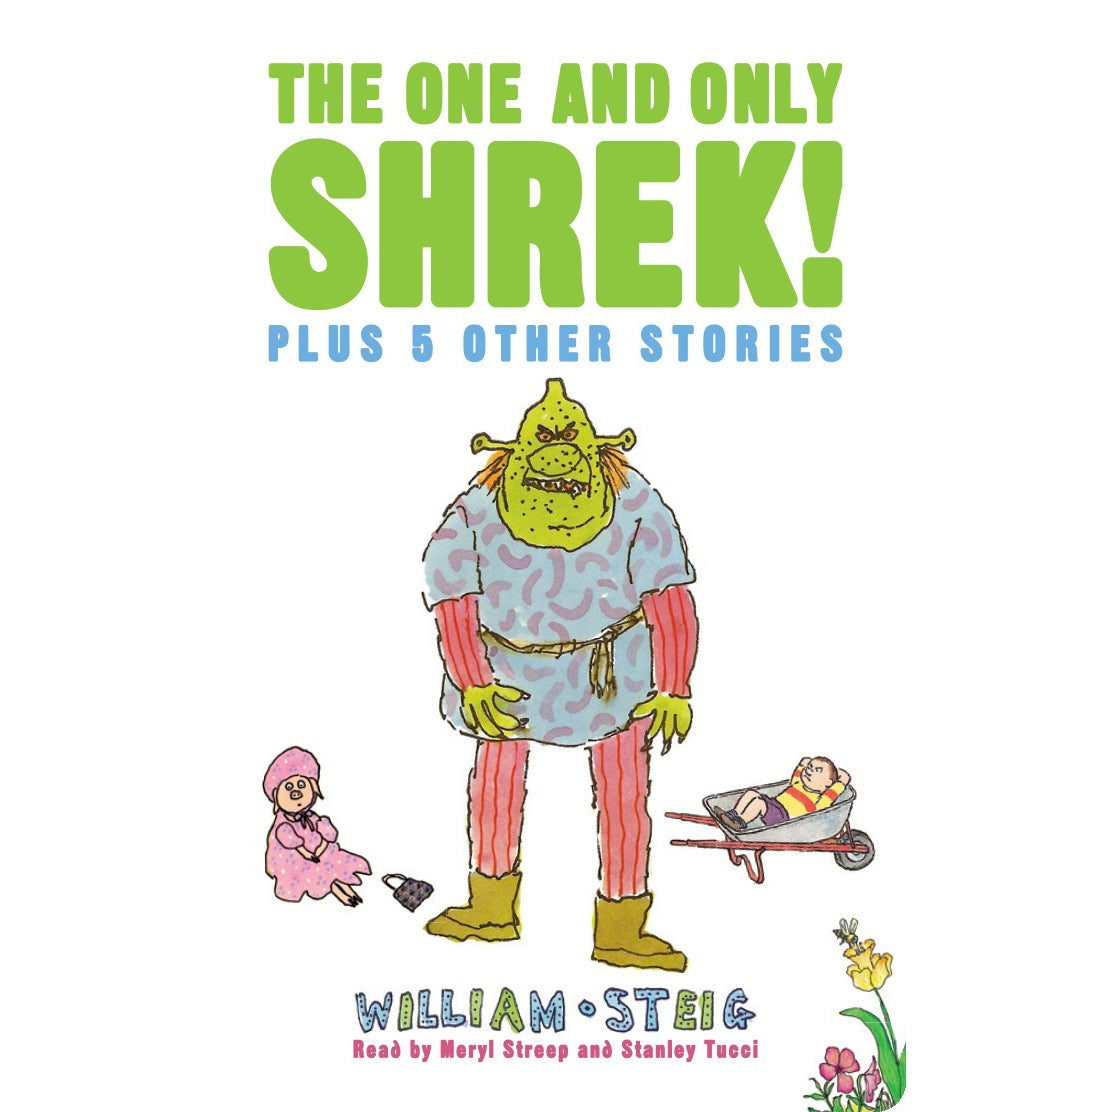 Yoto Card - The One and Only Shrek! - Child Friendly Audio Story Card for the Yoto Player